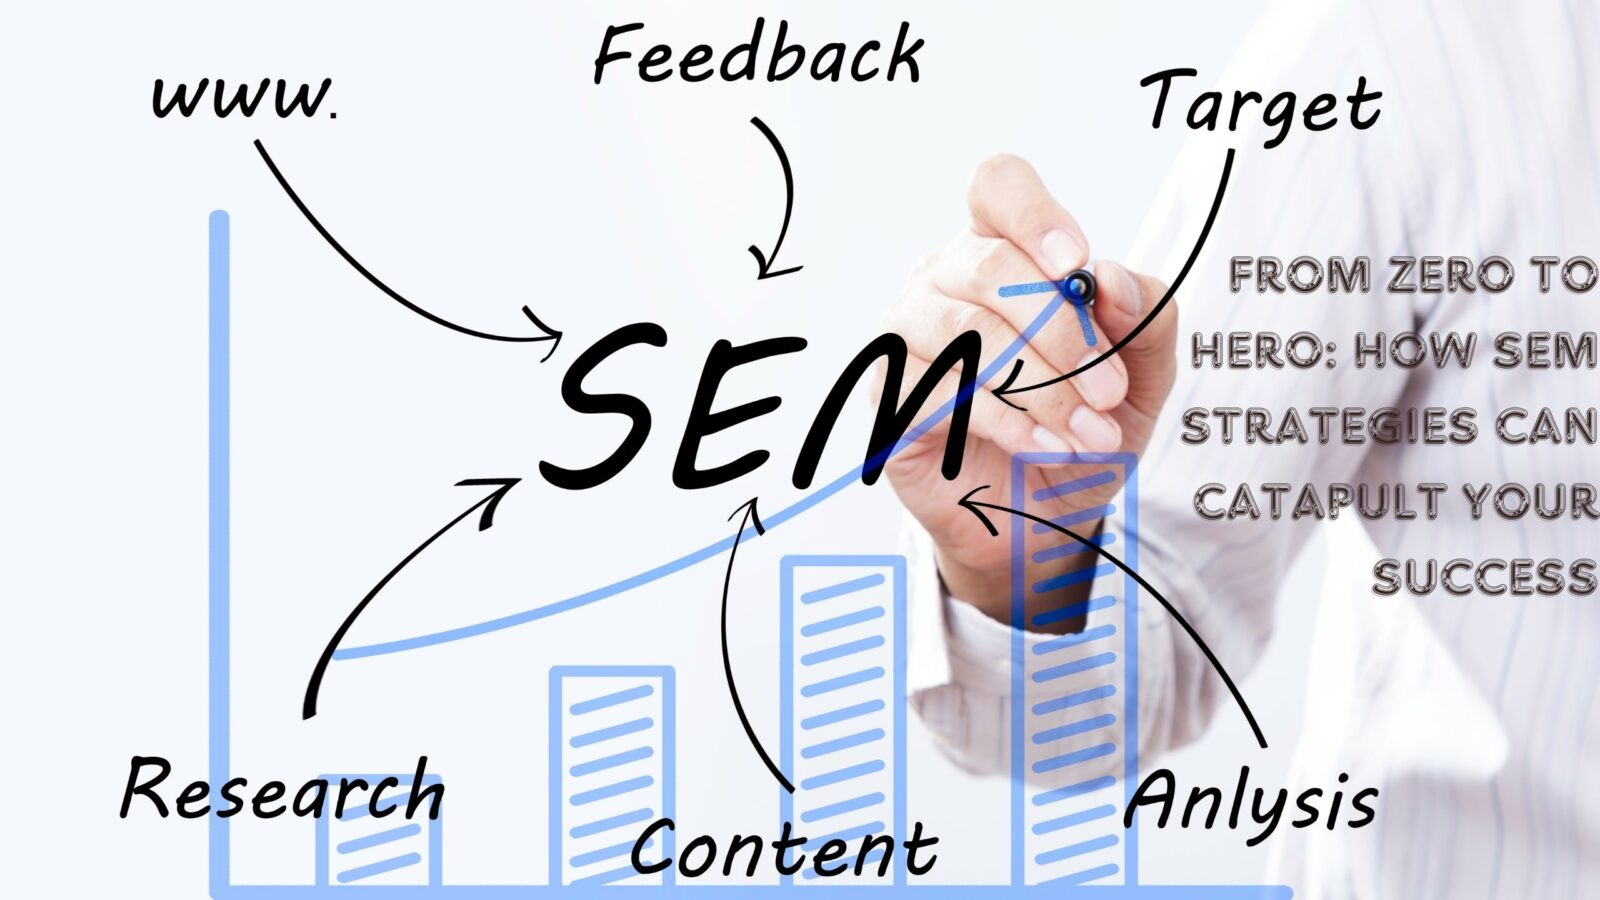 From Zero to Hero: How SEM Strategies Can Catapult Your Success